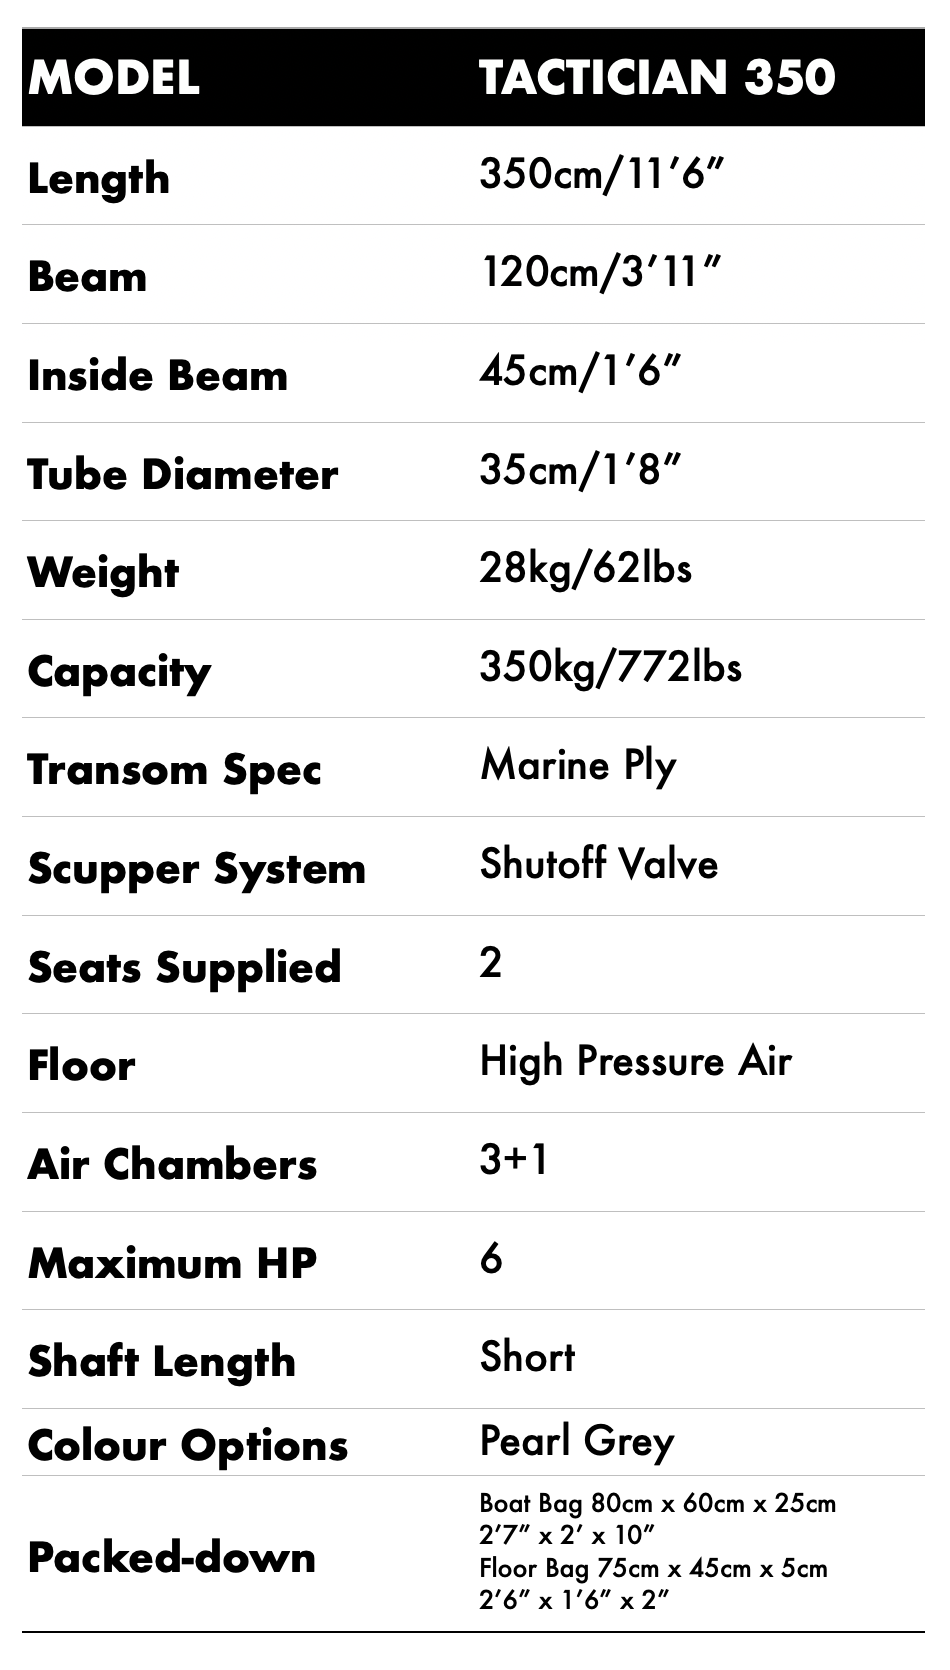 True Kit Tactician Specification Sheet including details like length, beam, weight, packdown size